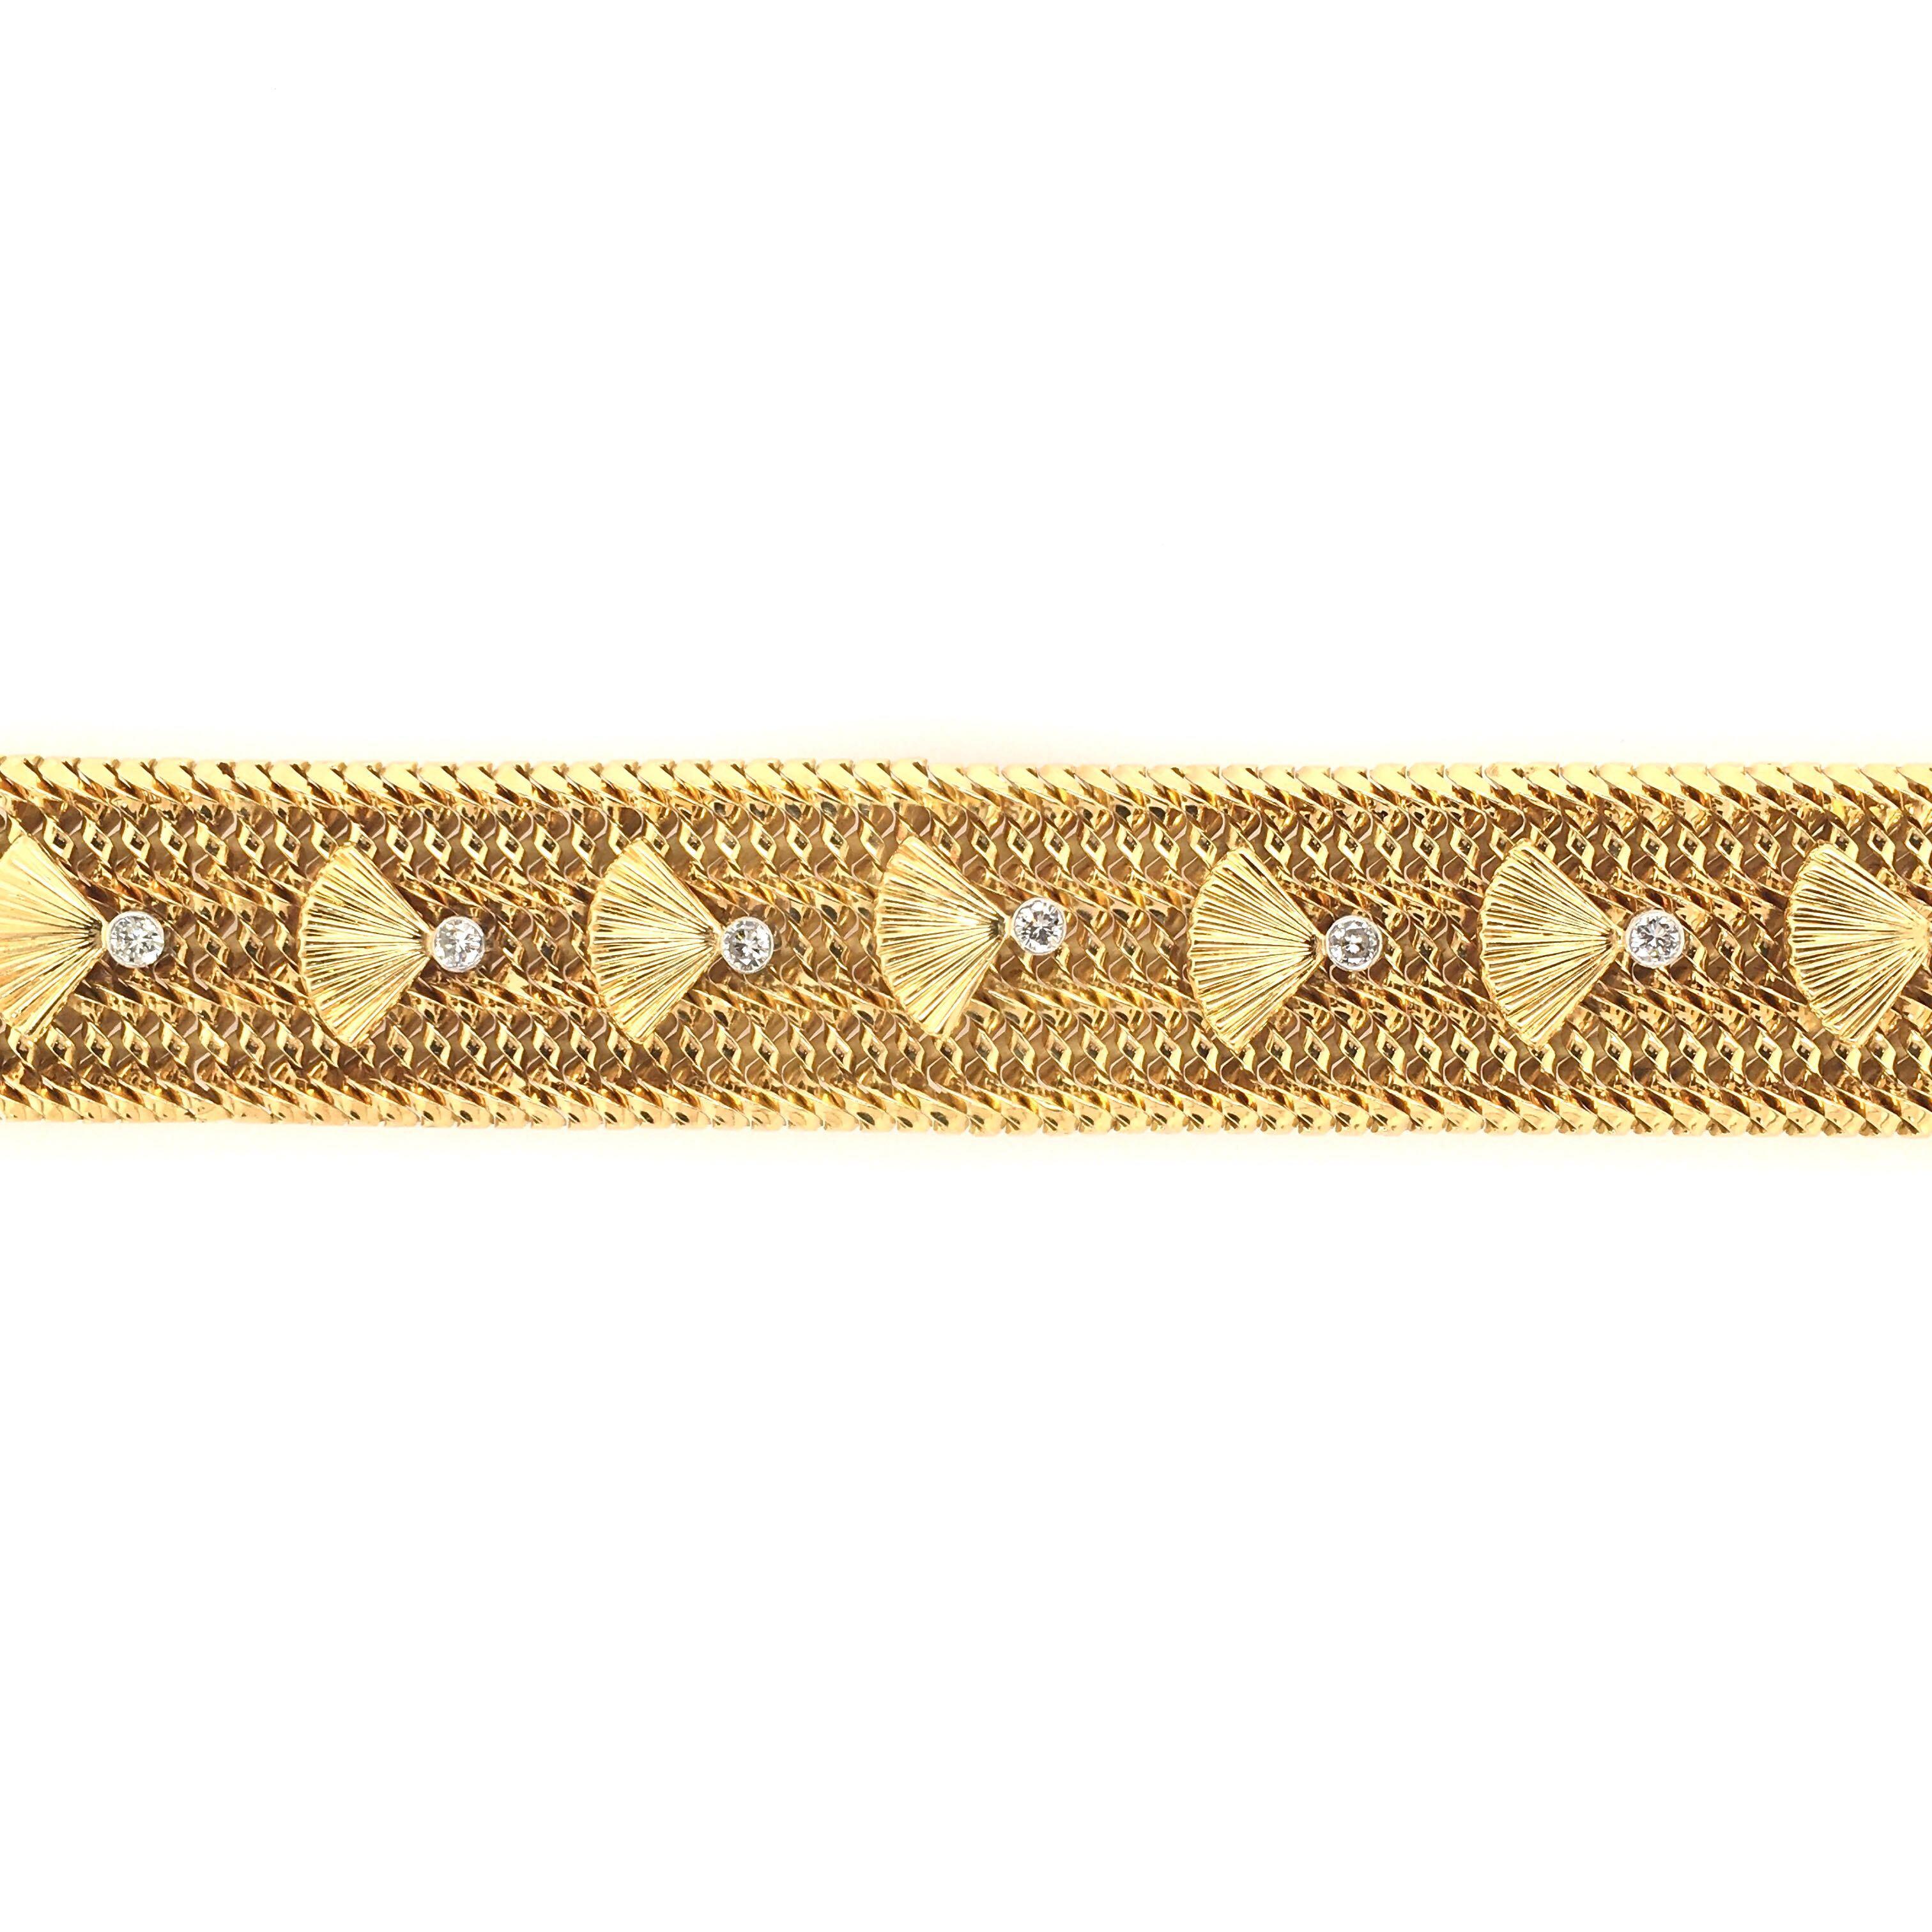 An 18 karat yellow gold and diamond bracelet. French. Circa 1940. Designed as a mesh band, set with polished and fluted gold fan motifs and circular cut diamonds. Length is approximately 7 inches, gross weight is approximately 77.7 grams. With